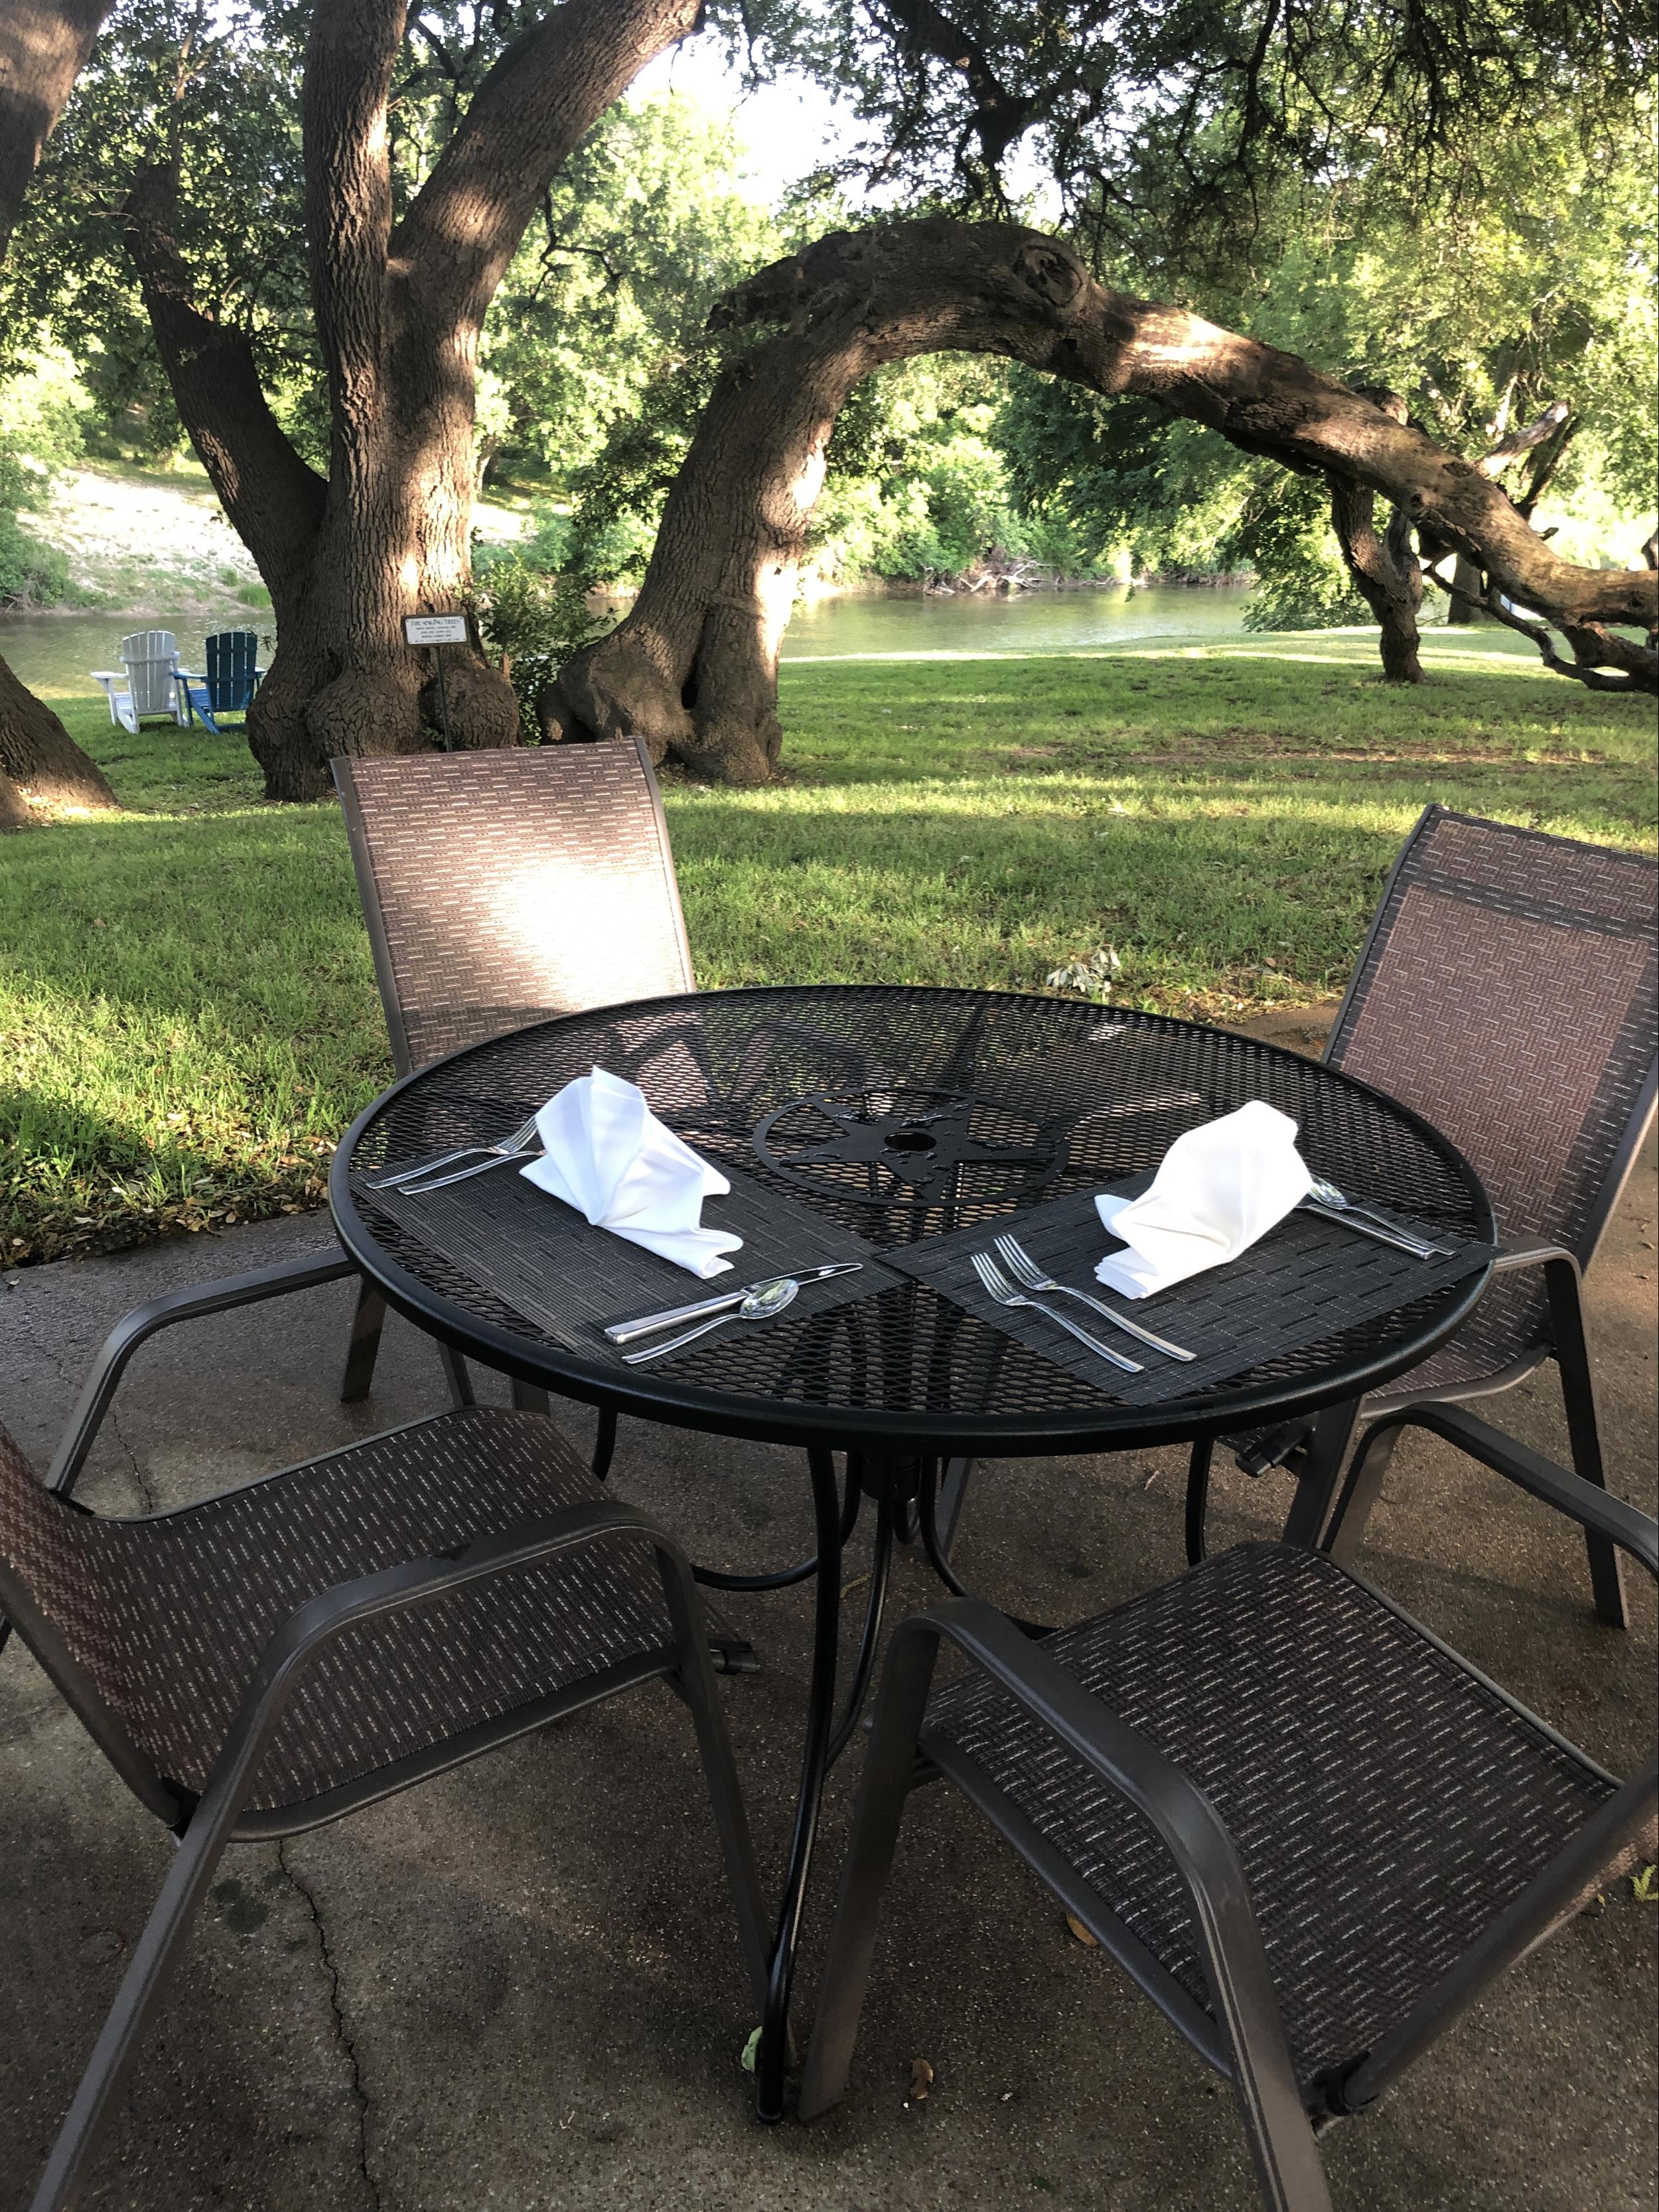 Outdoor Dining near Singing Trees at Inn on the River